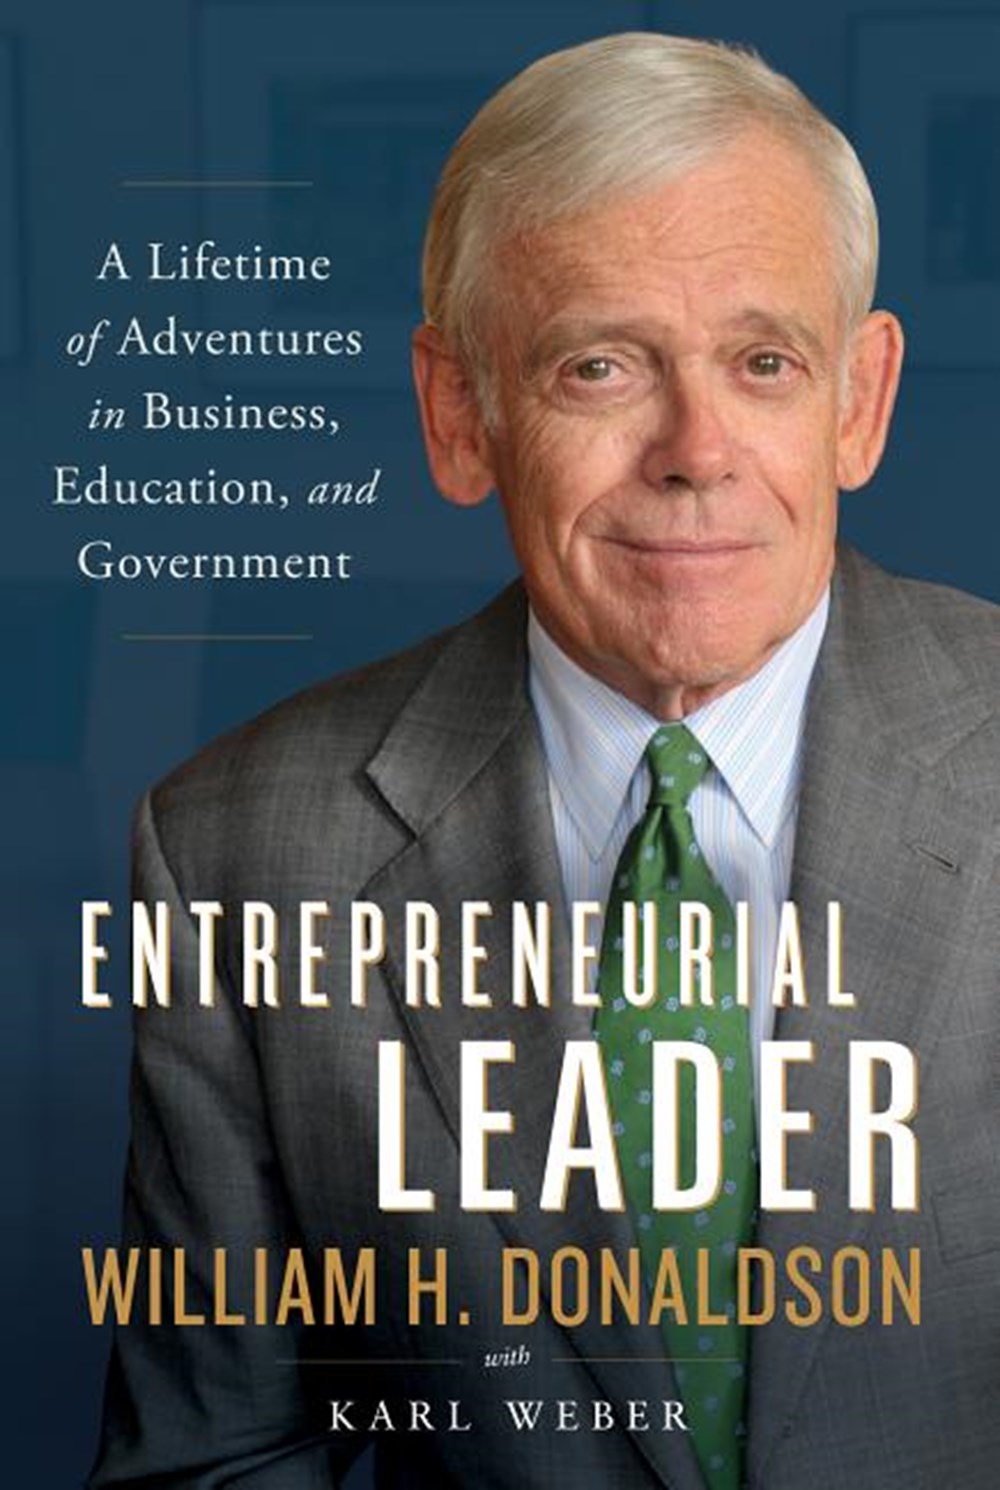 Entrepreneurial Leader A Lifetime of Adventures in Business, Education, and Government